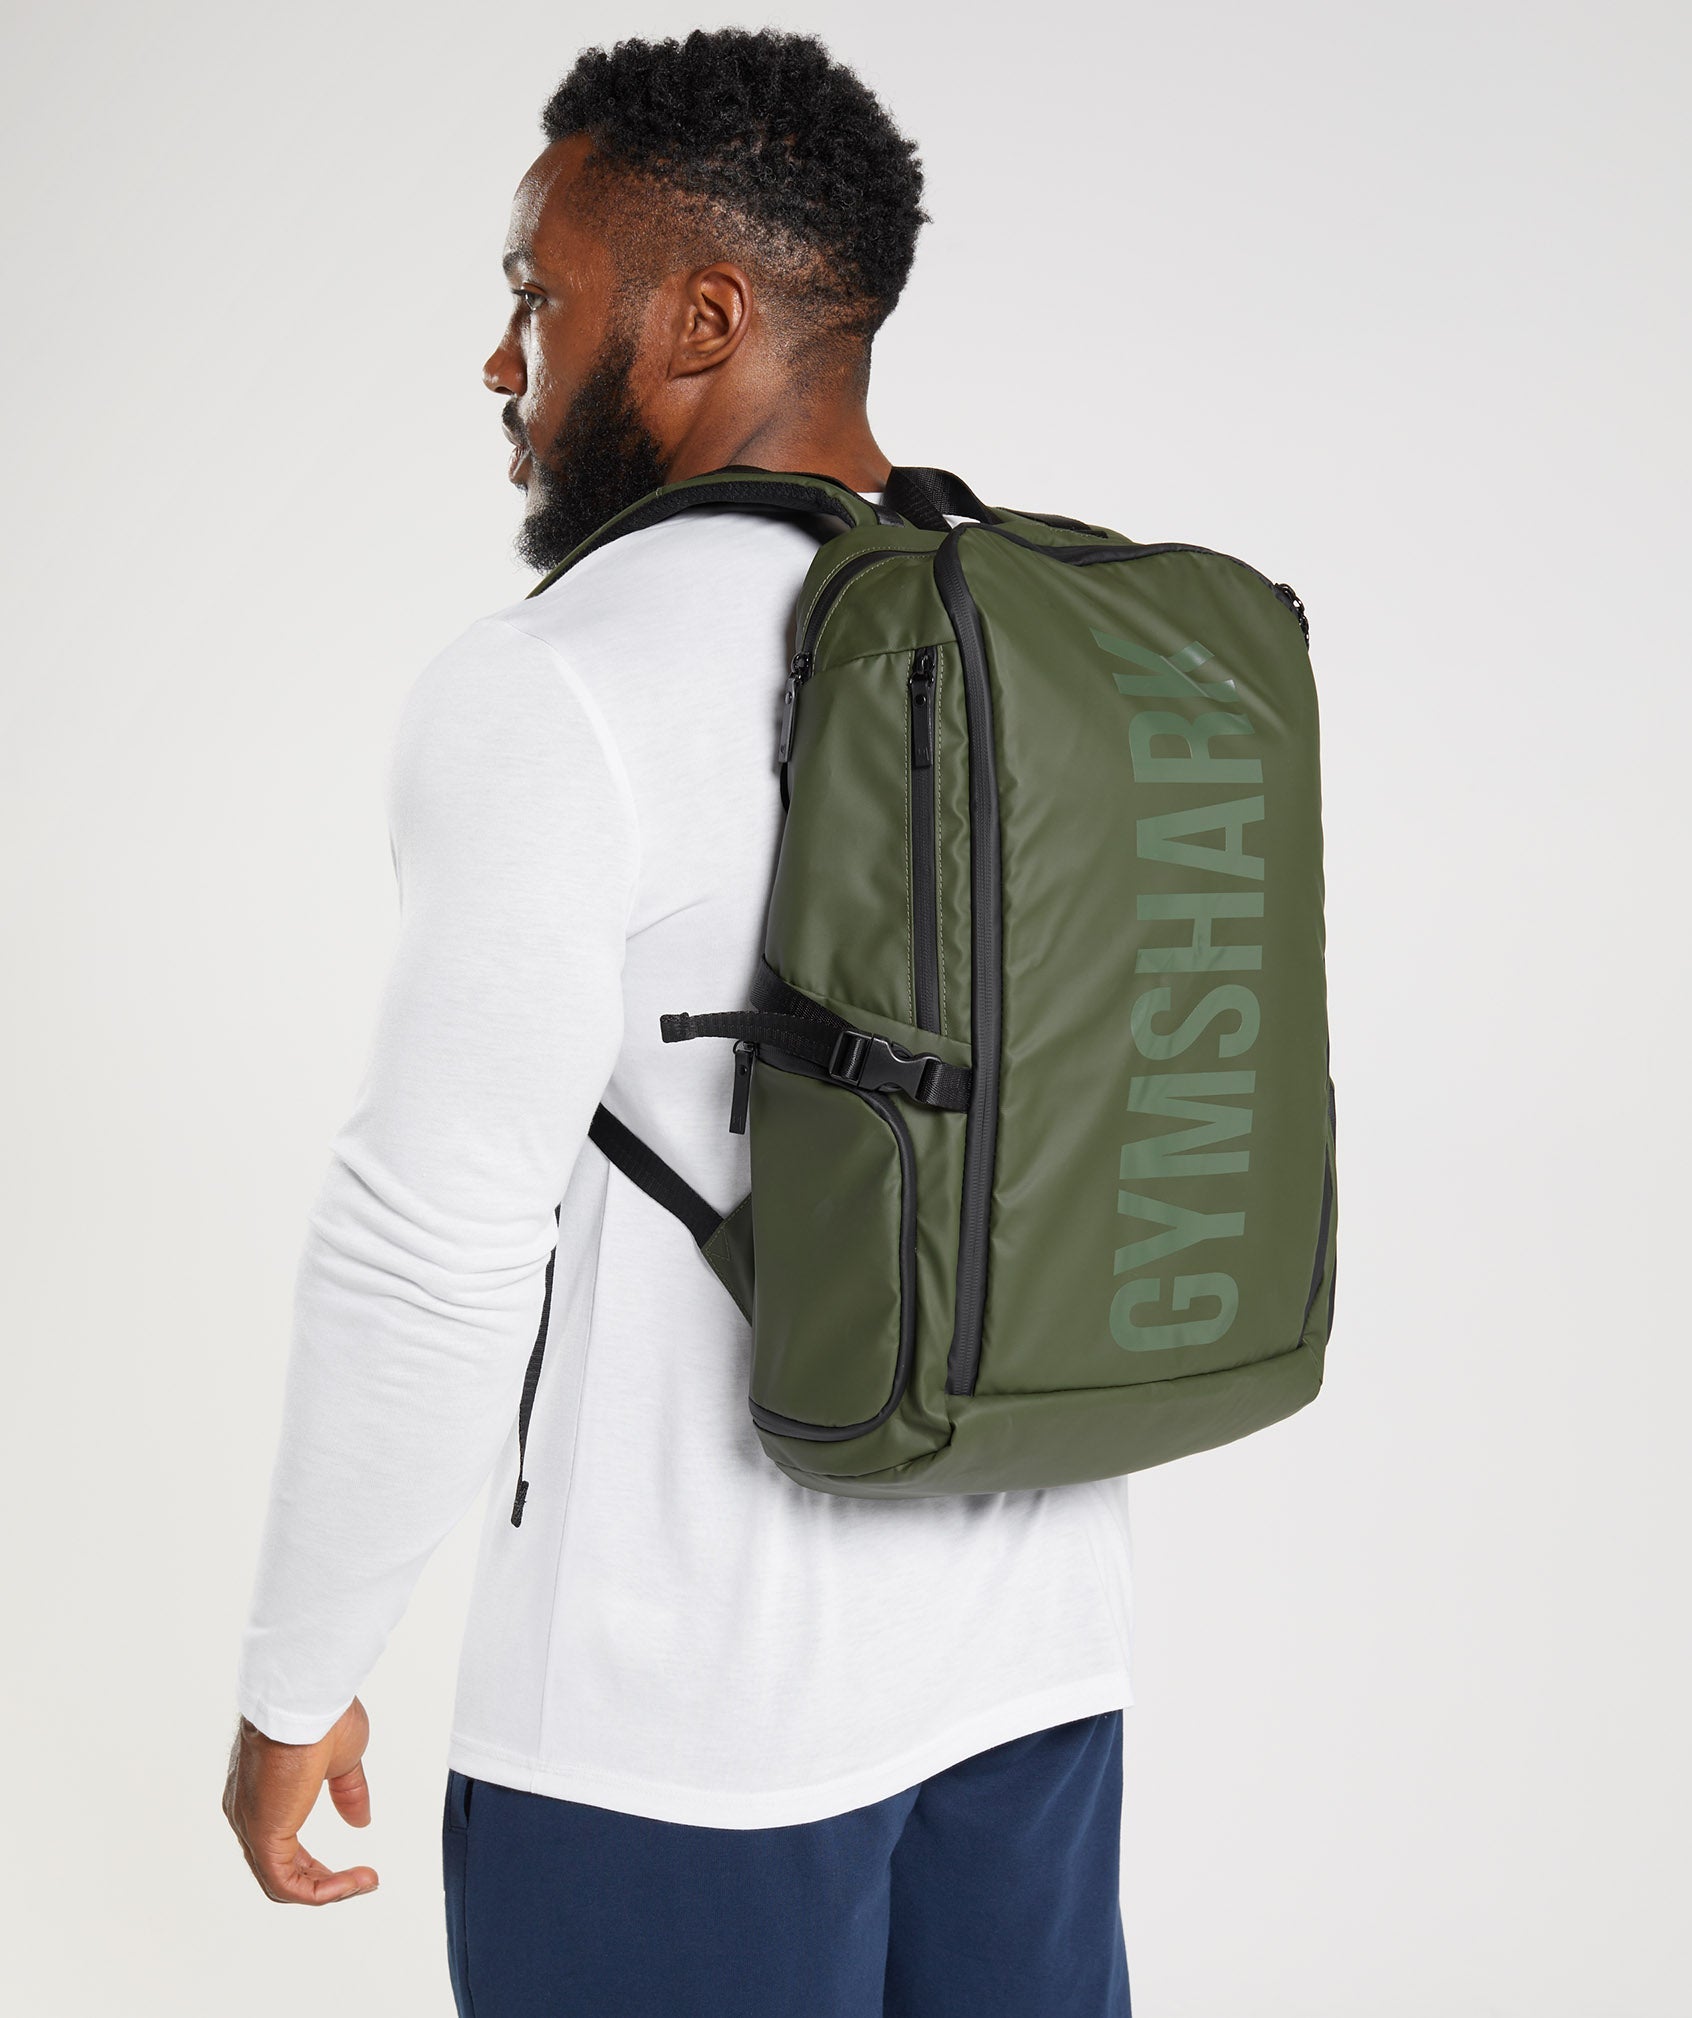 X-Series Bag 0.3 in Core Olive - view 1